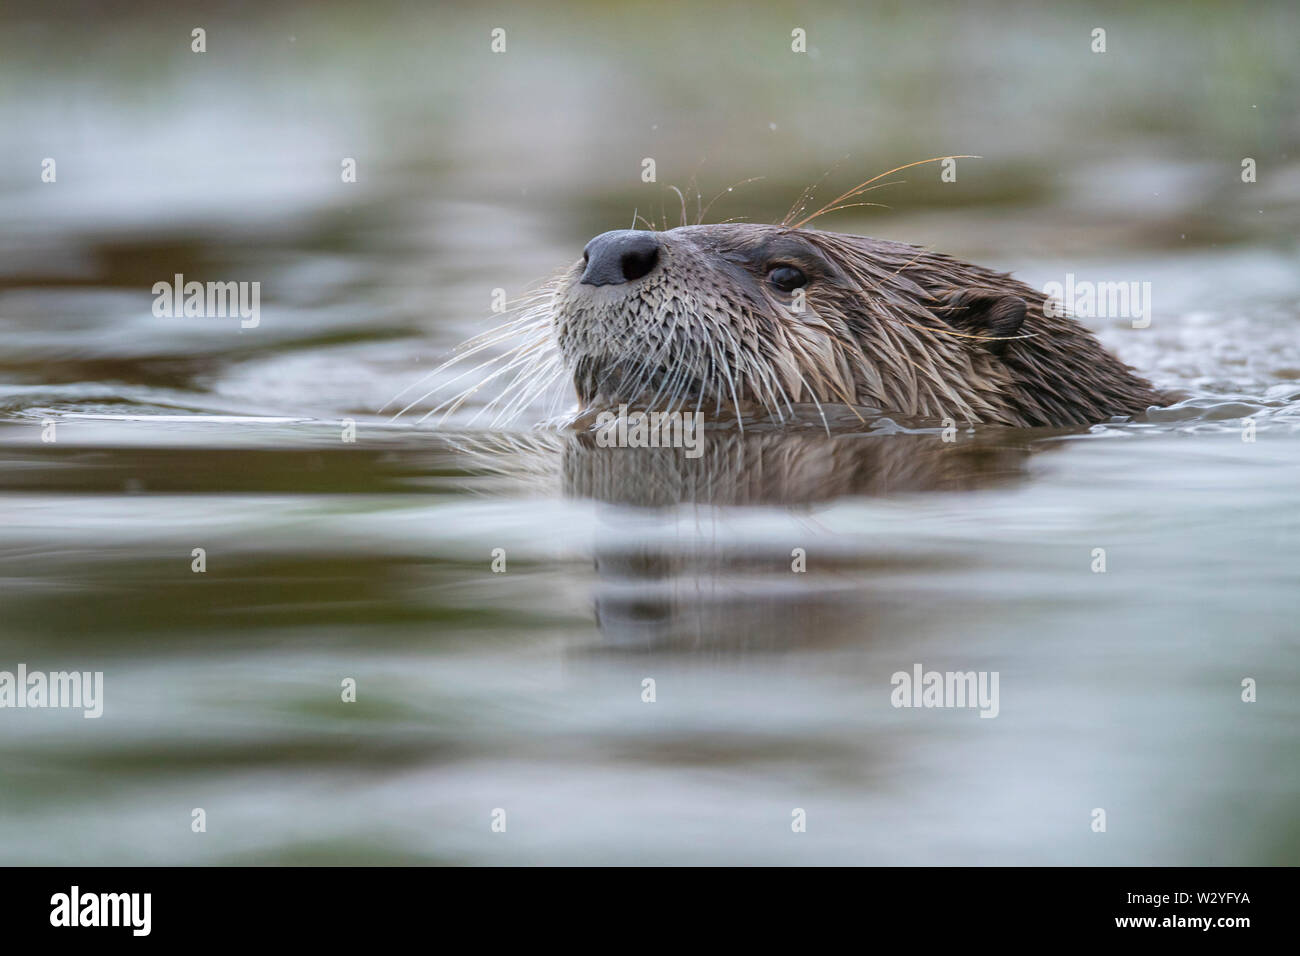 European Otter, Lower Saxony, Germany, Lutra lutra Stock Photo